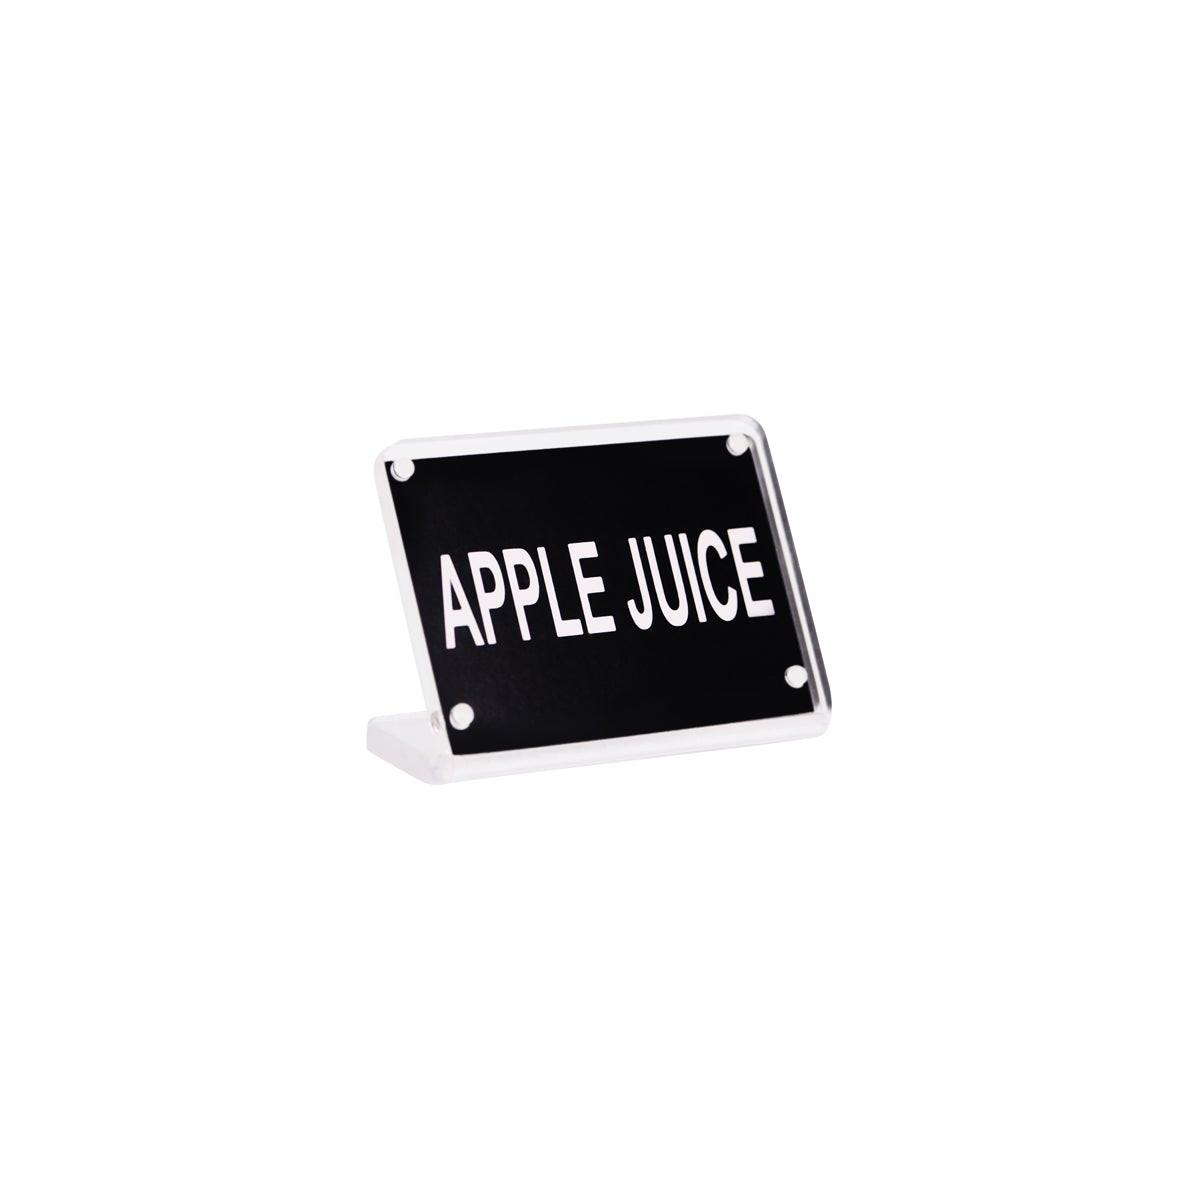 81323 Chef Inox Buffet Sign Acrylic with Magnet Plate - Apple Juice Tomkin Australia Hospitality Supplies